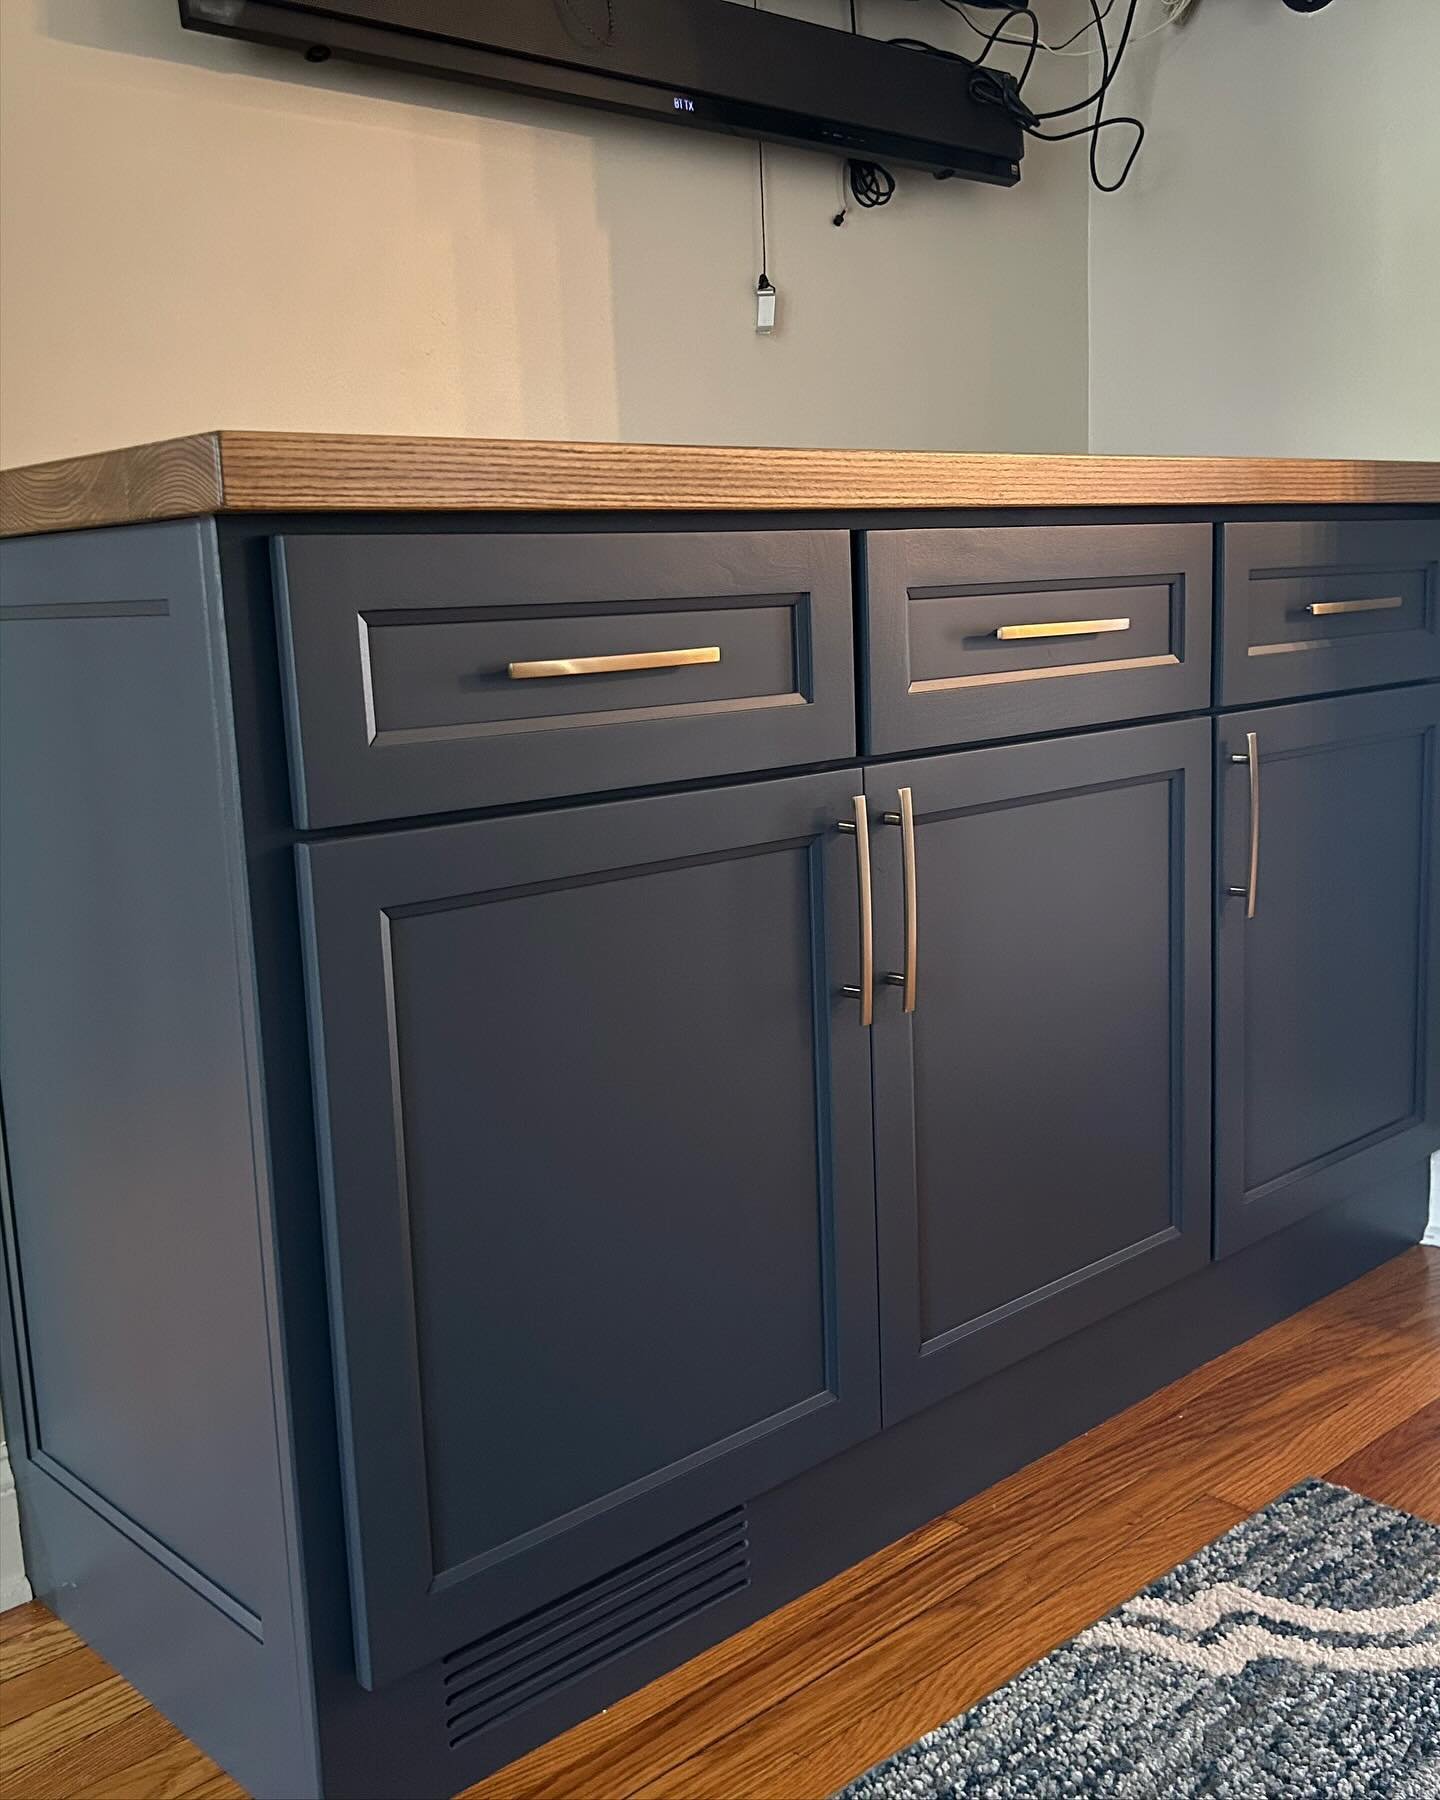 The infamous Corner Crap cabinet as my client called it!! Custom cabinet finished in Hale Navy using Gemini&rsquo;s Evo 20 sheen.  The top is Solid Ash, stained to match a color combo I used on a previous job, and cleared with Old Masters Armor, Sati